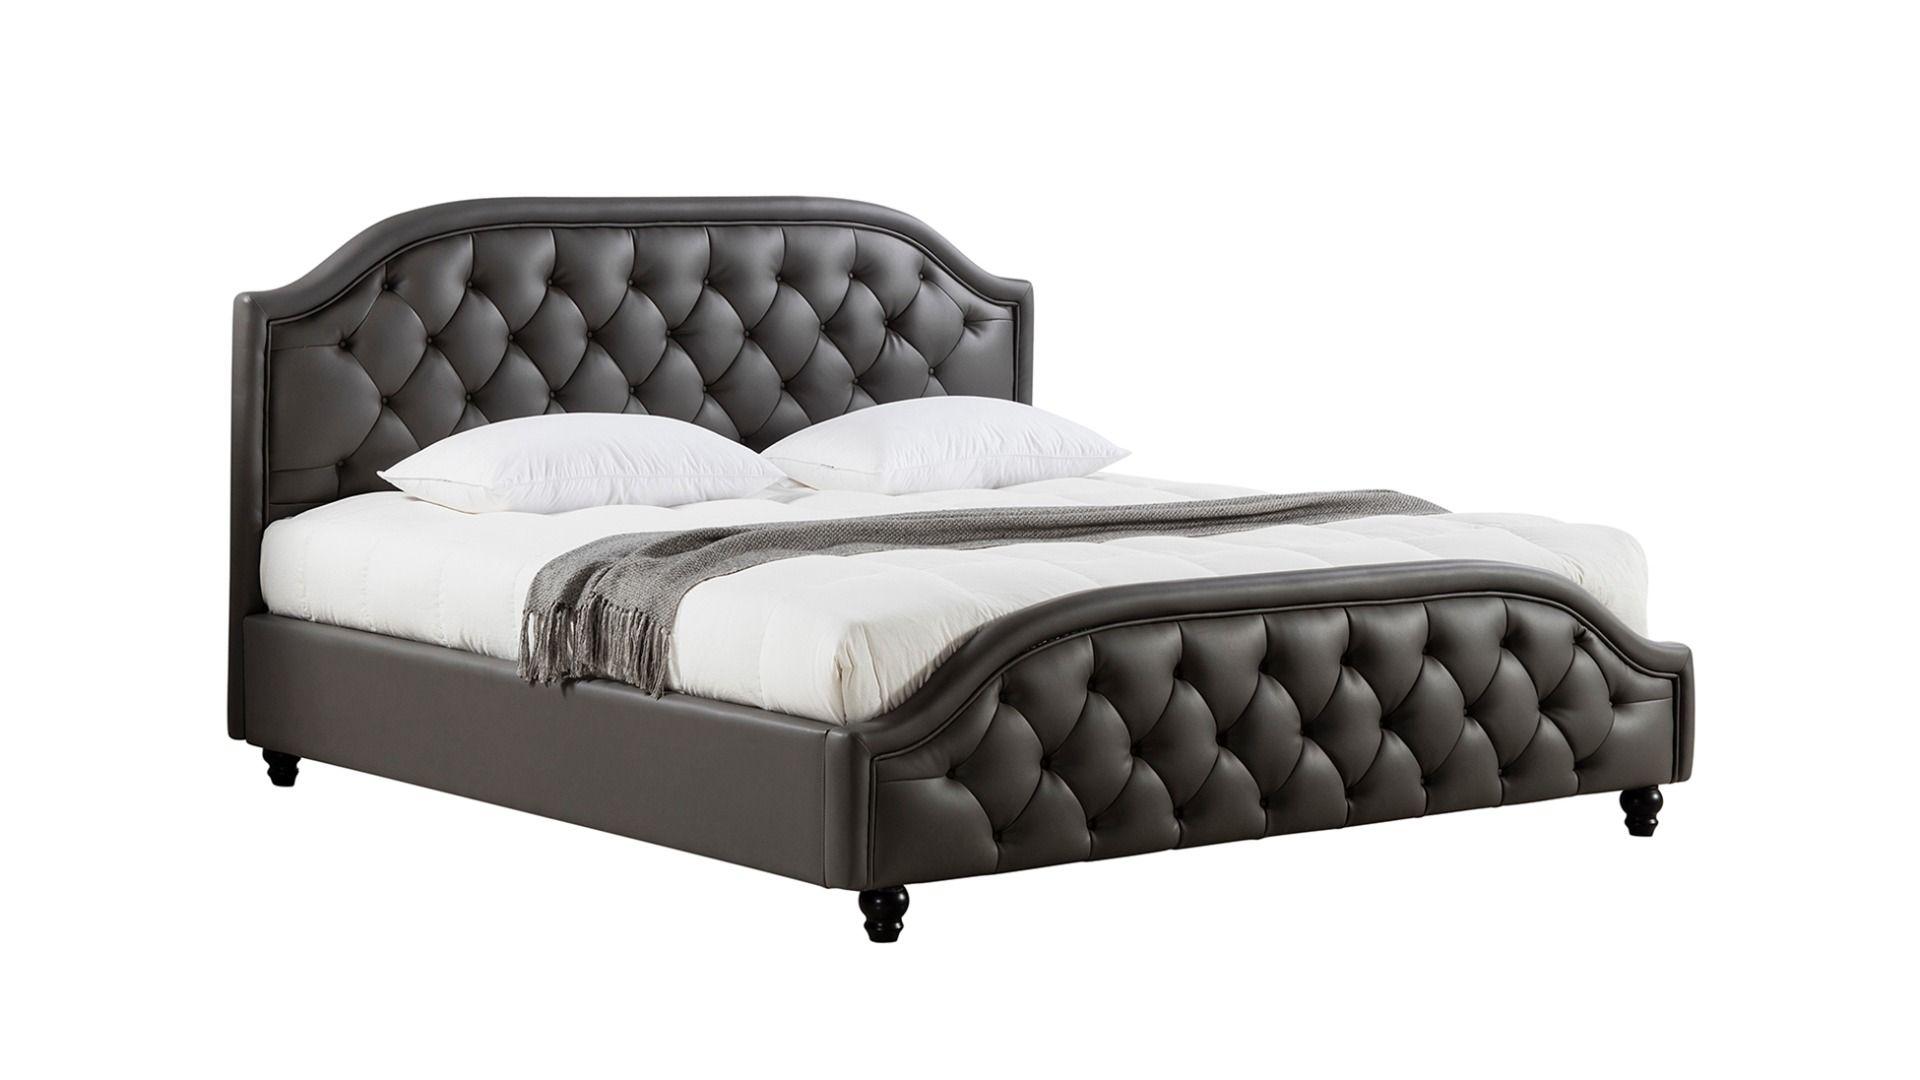 Contemporary Platform Bed B-D058 AE B-D058-CK in Dark Gray Leather Air Fabric